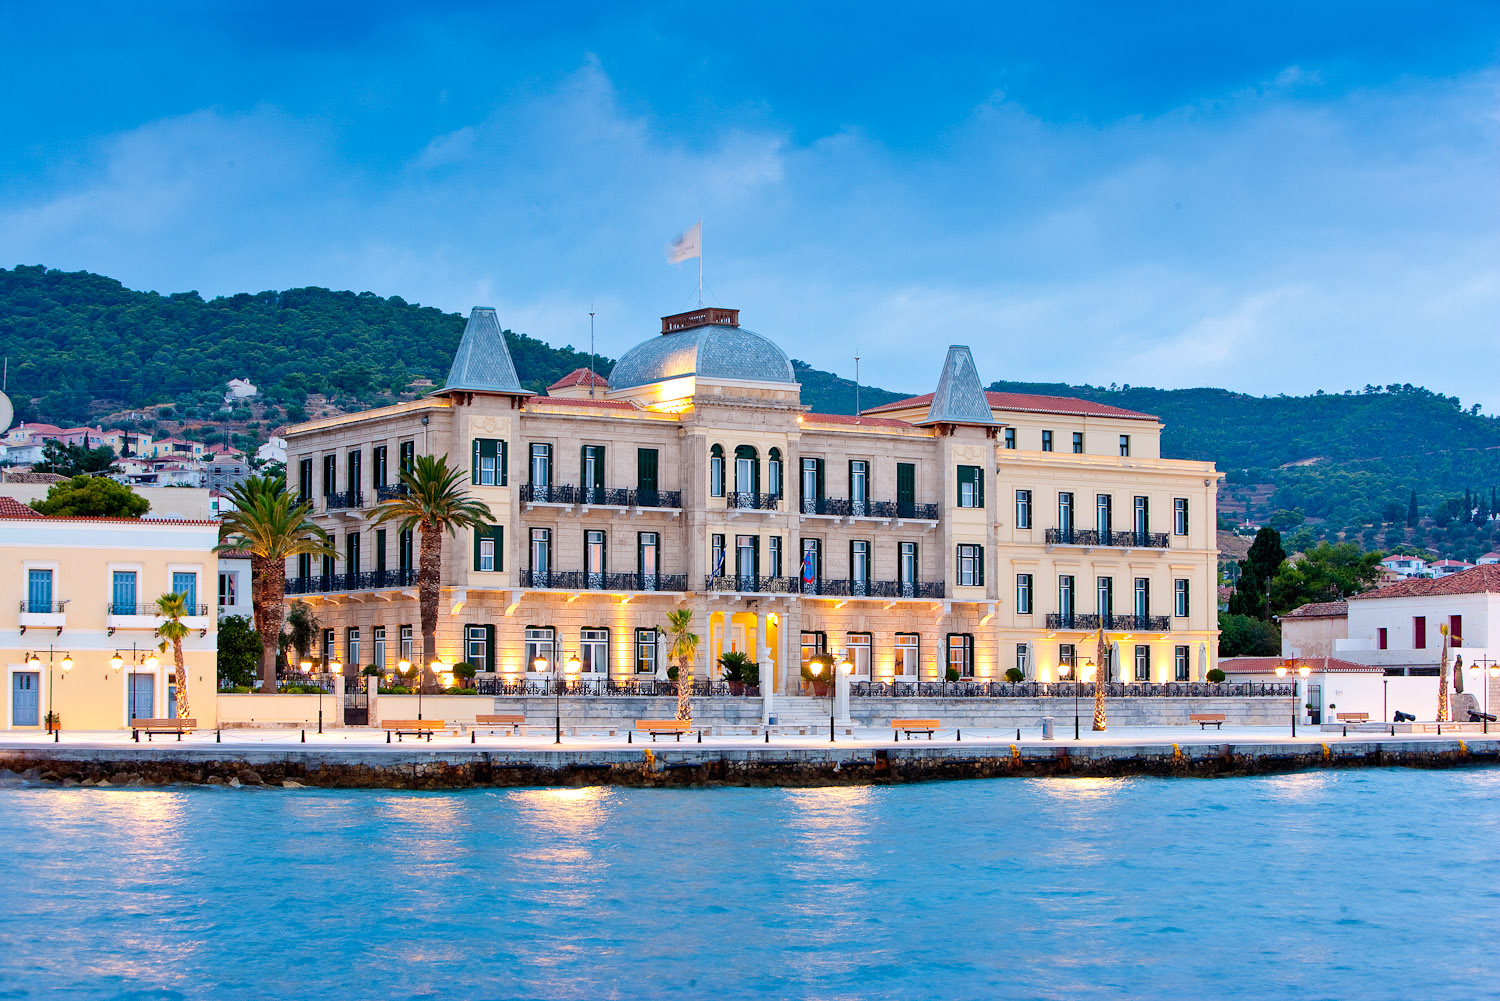 The architecture of Poseidonion Grand Hotel is reminiscent of southern France.